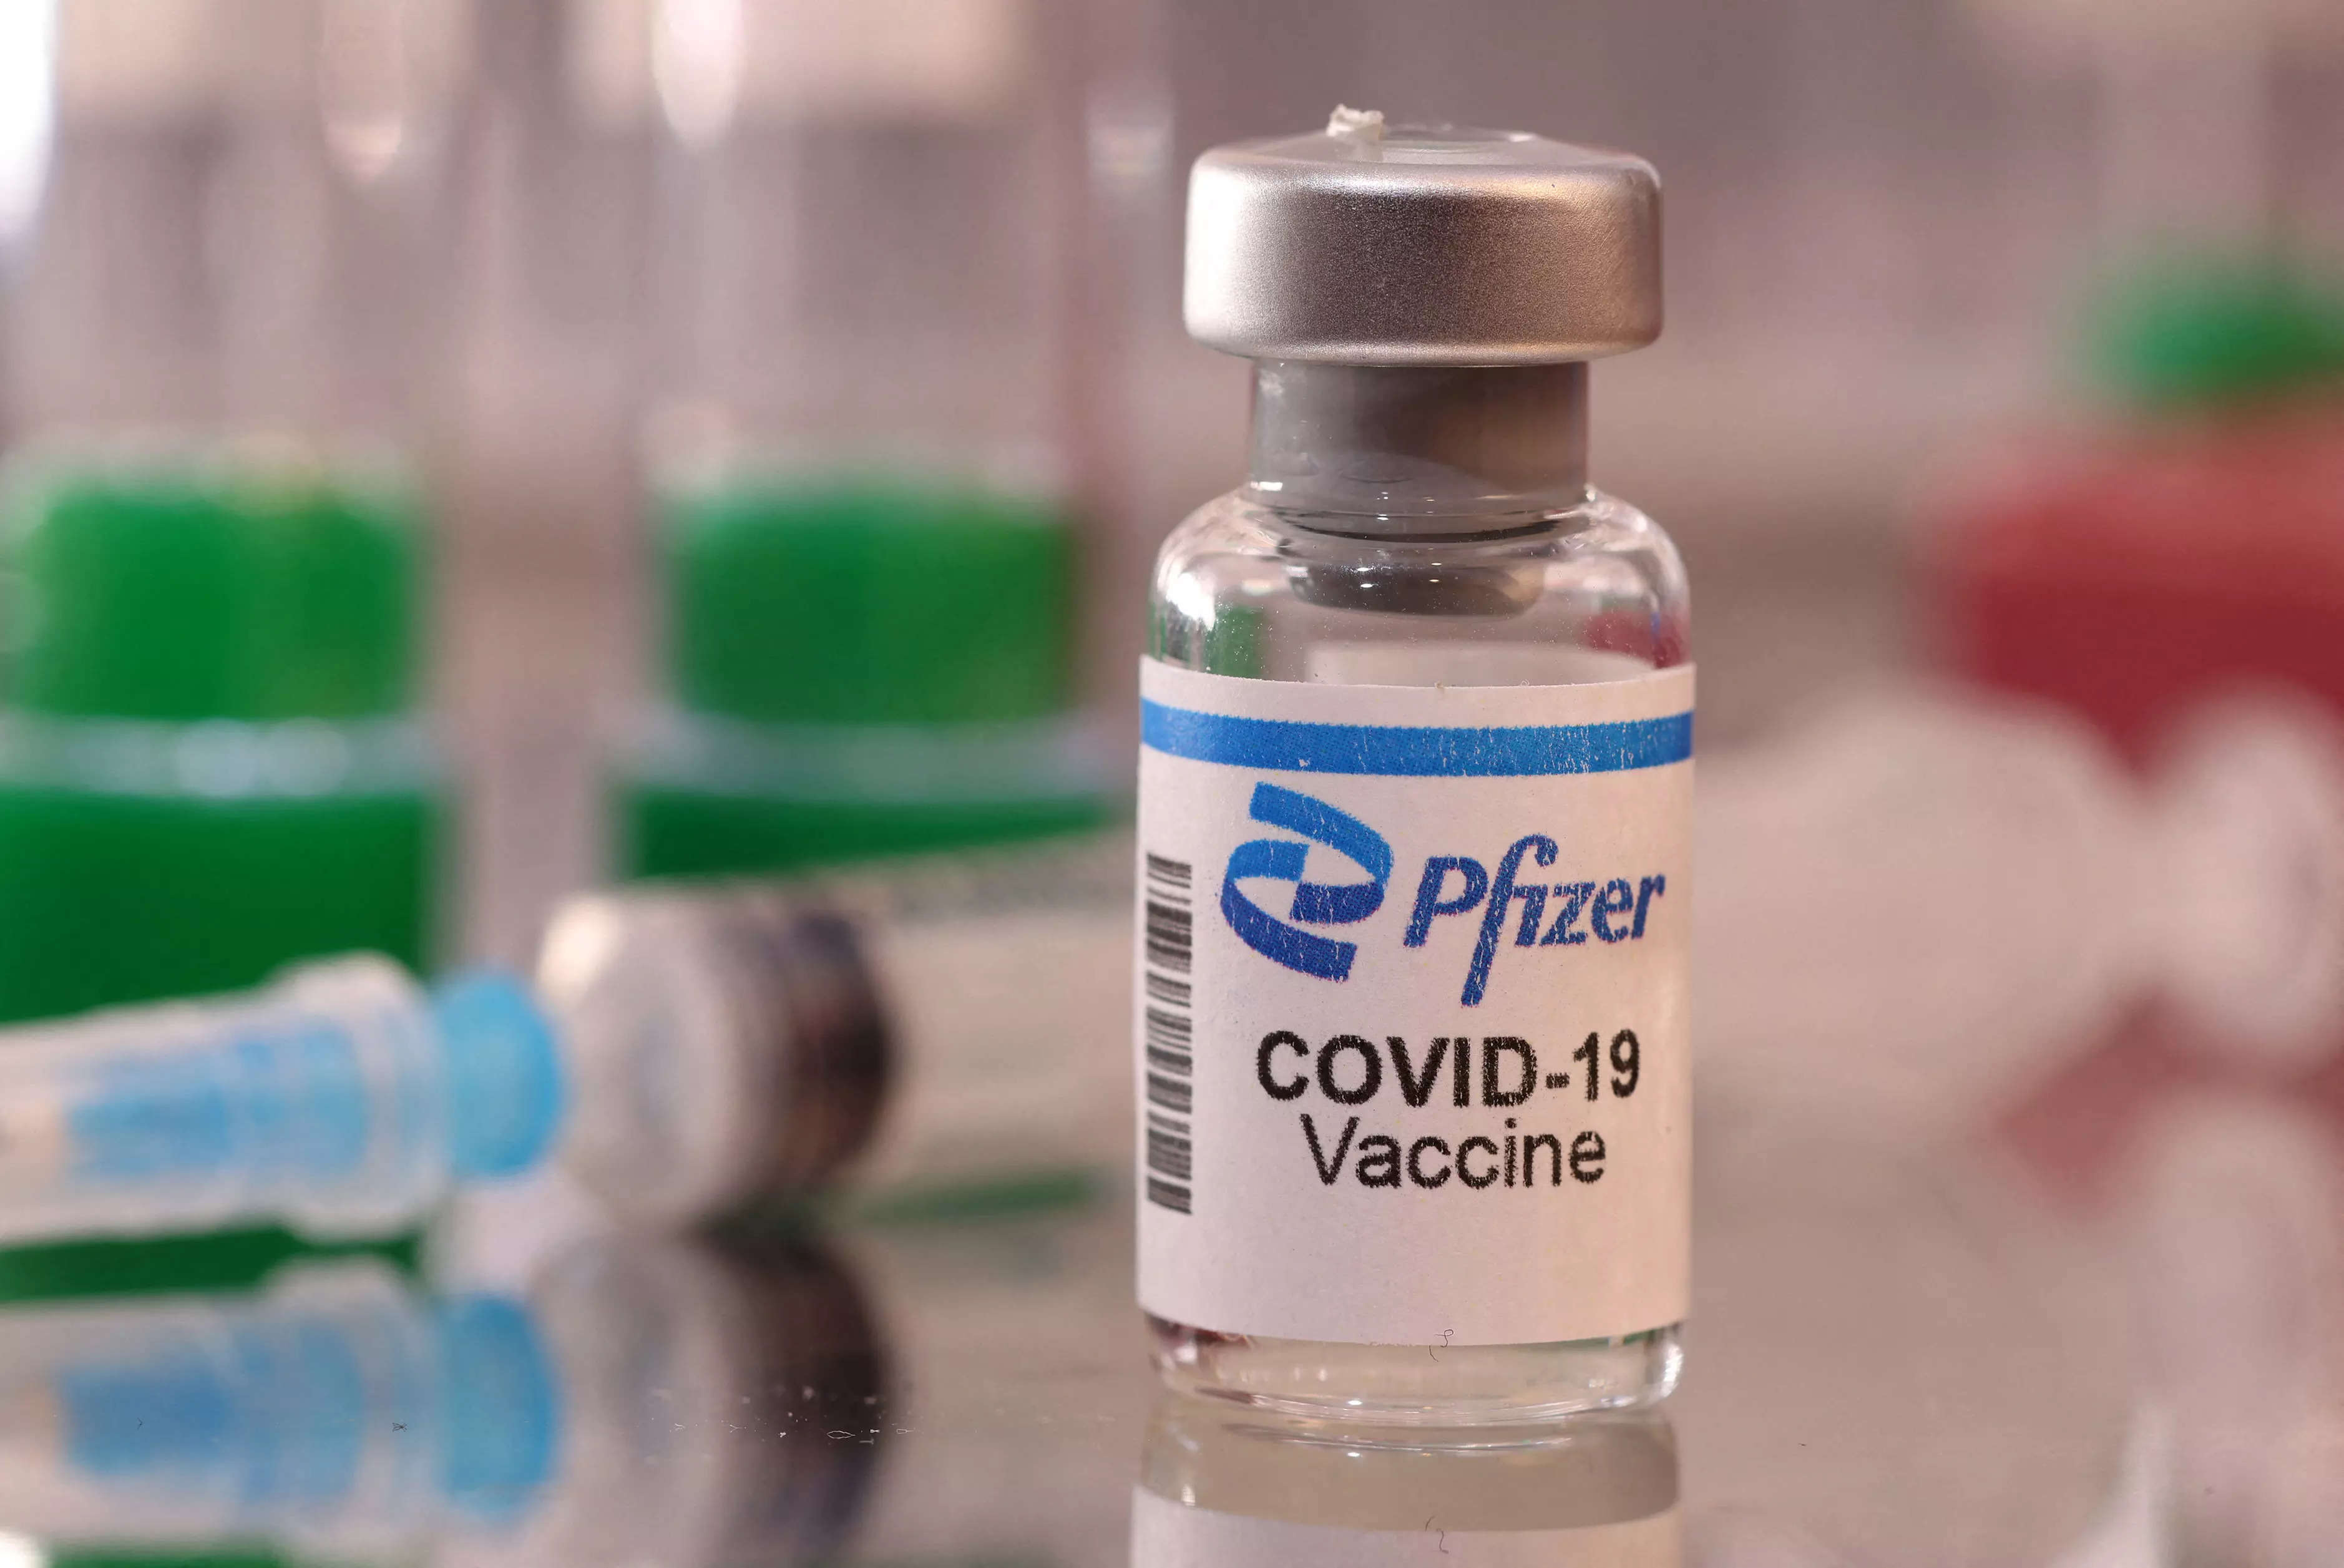 COVID-19 vaccine scheme for world's poorest pushes for delivery slowdown